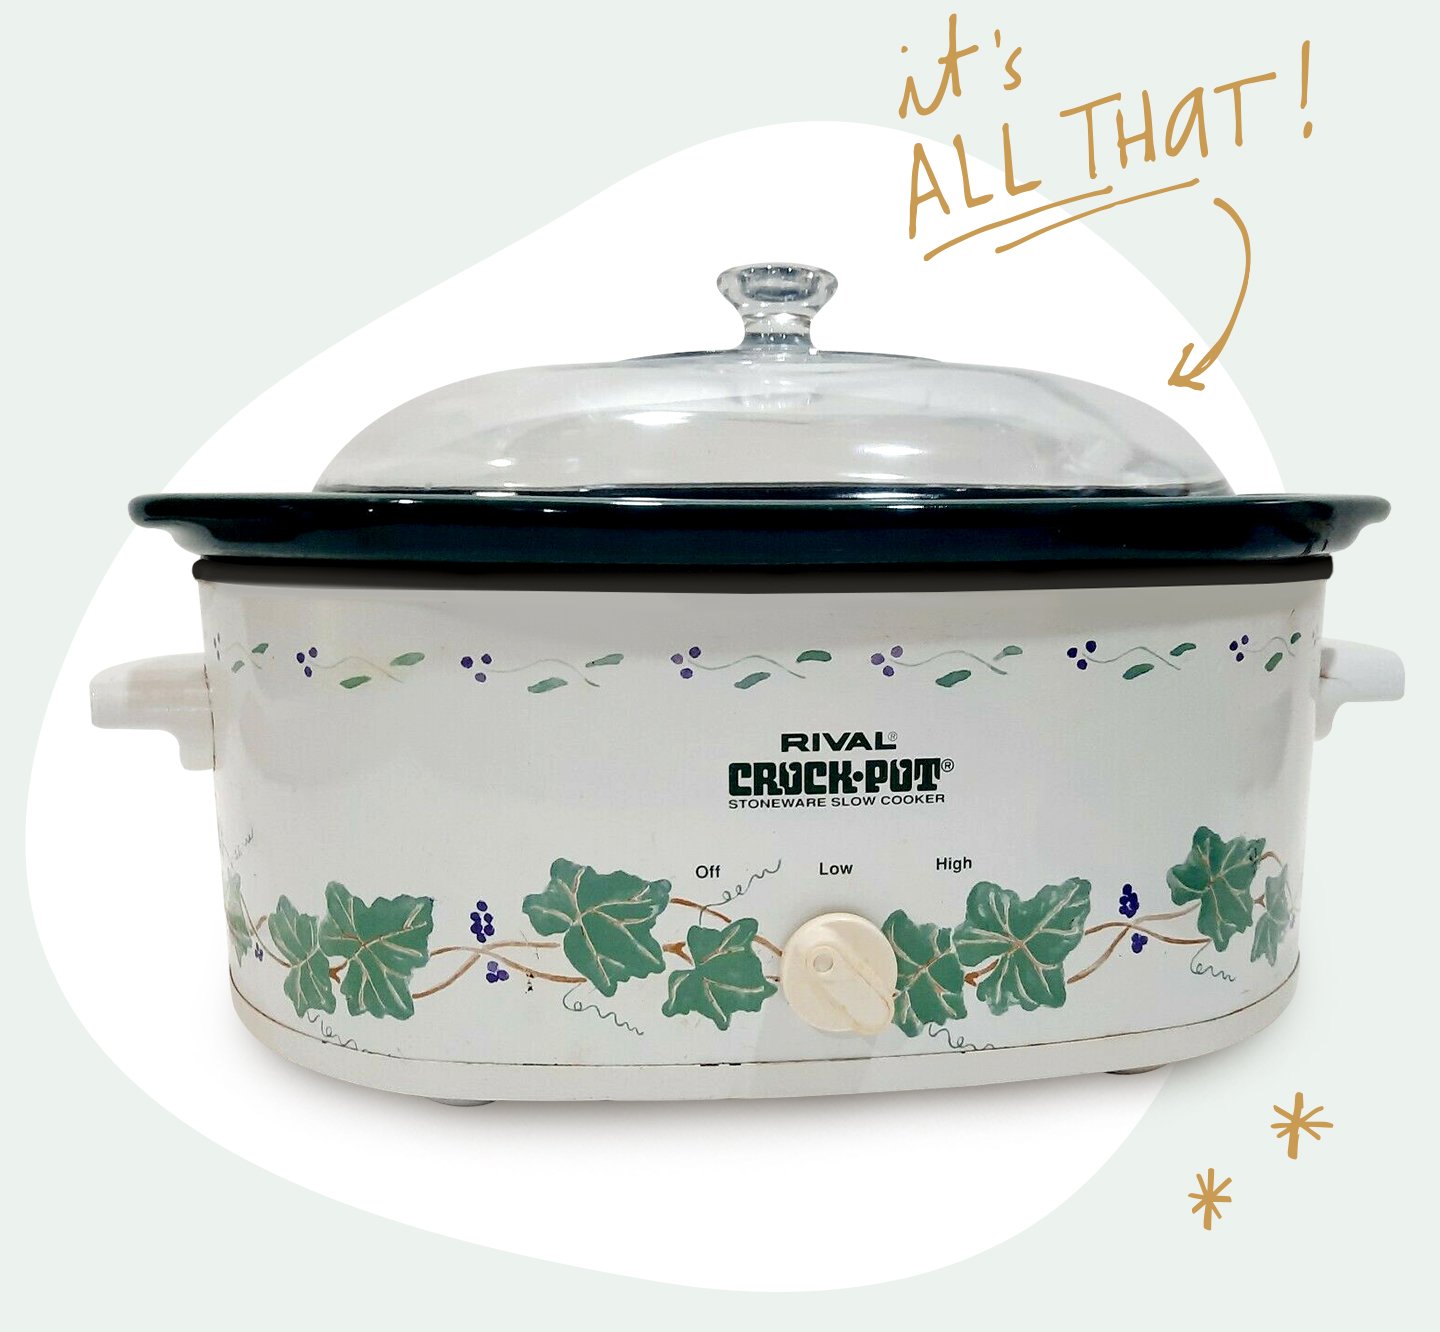 it is all that slow cooker with festive design